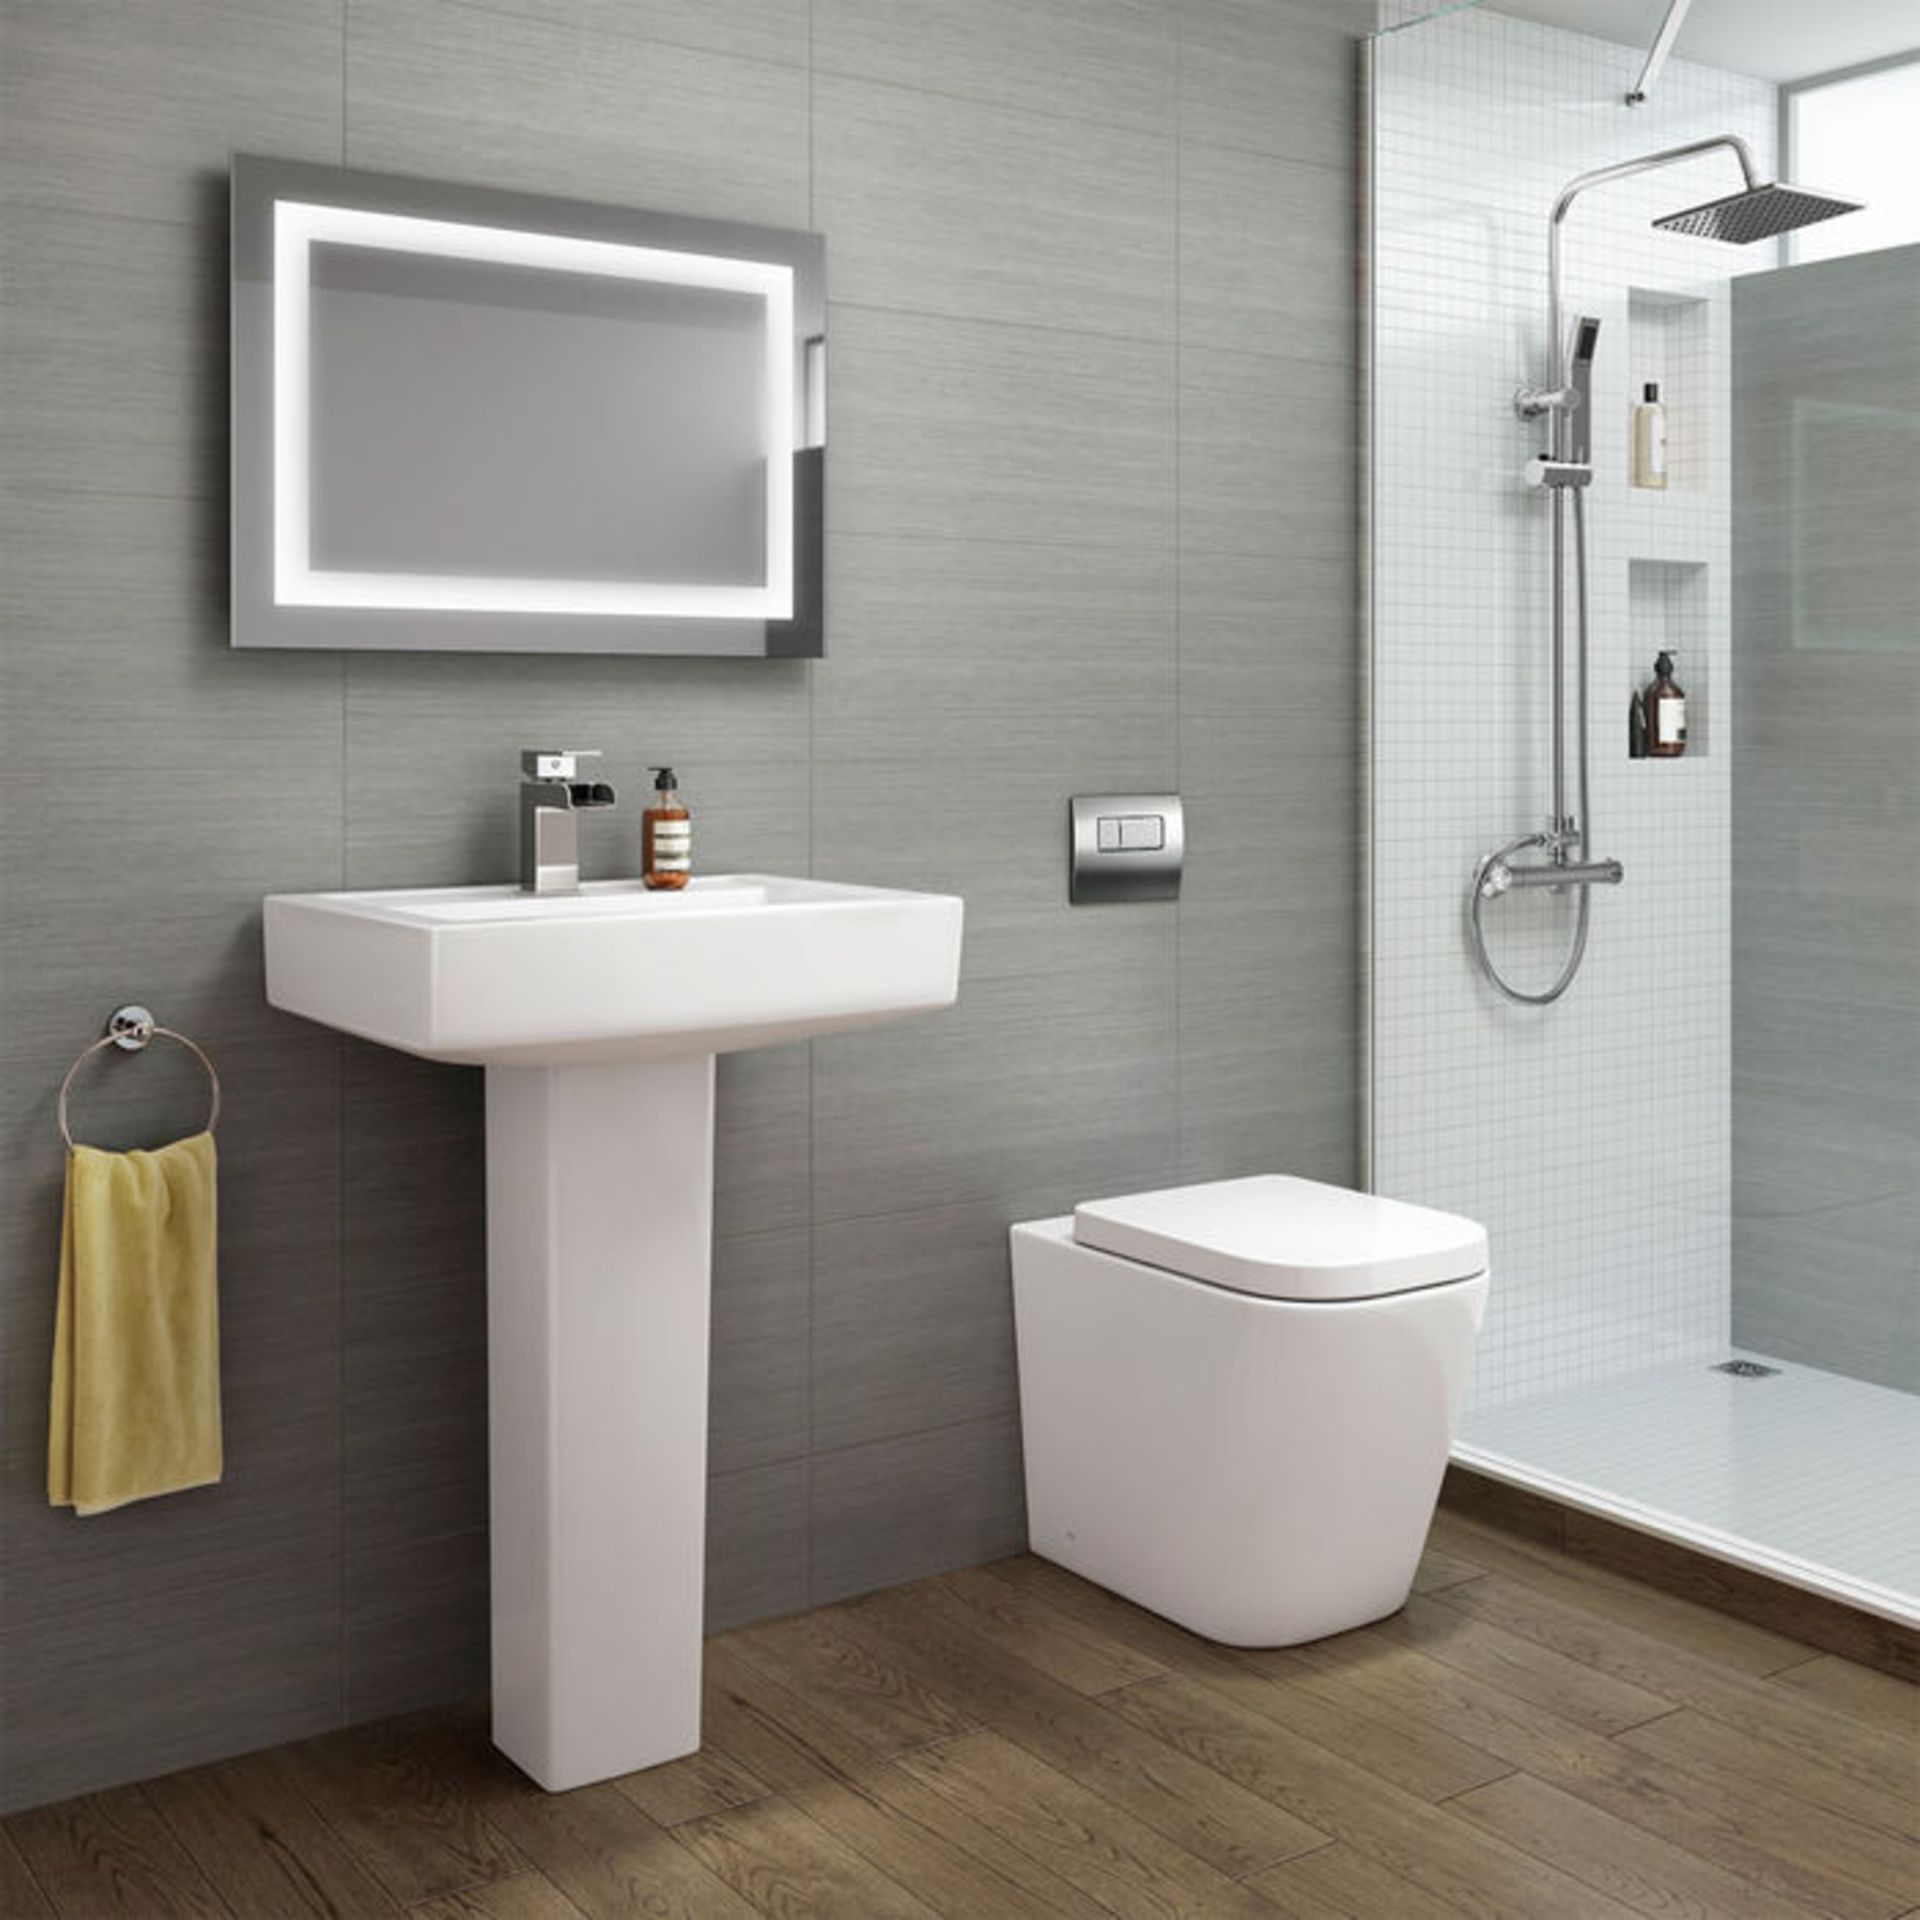 (SP50) Florence Rimless Back to Wall Toilet inc Luxury Soft Close Seat Rimless design makes it - Image 2 of 2